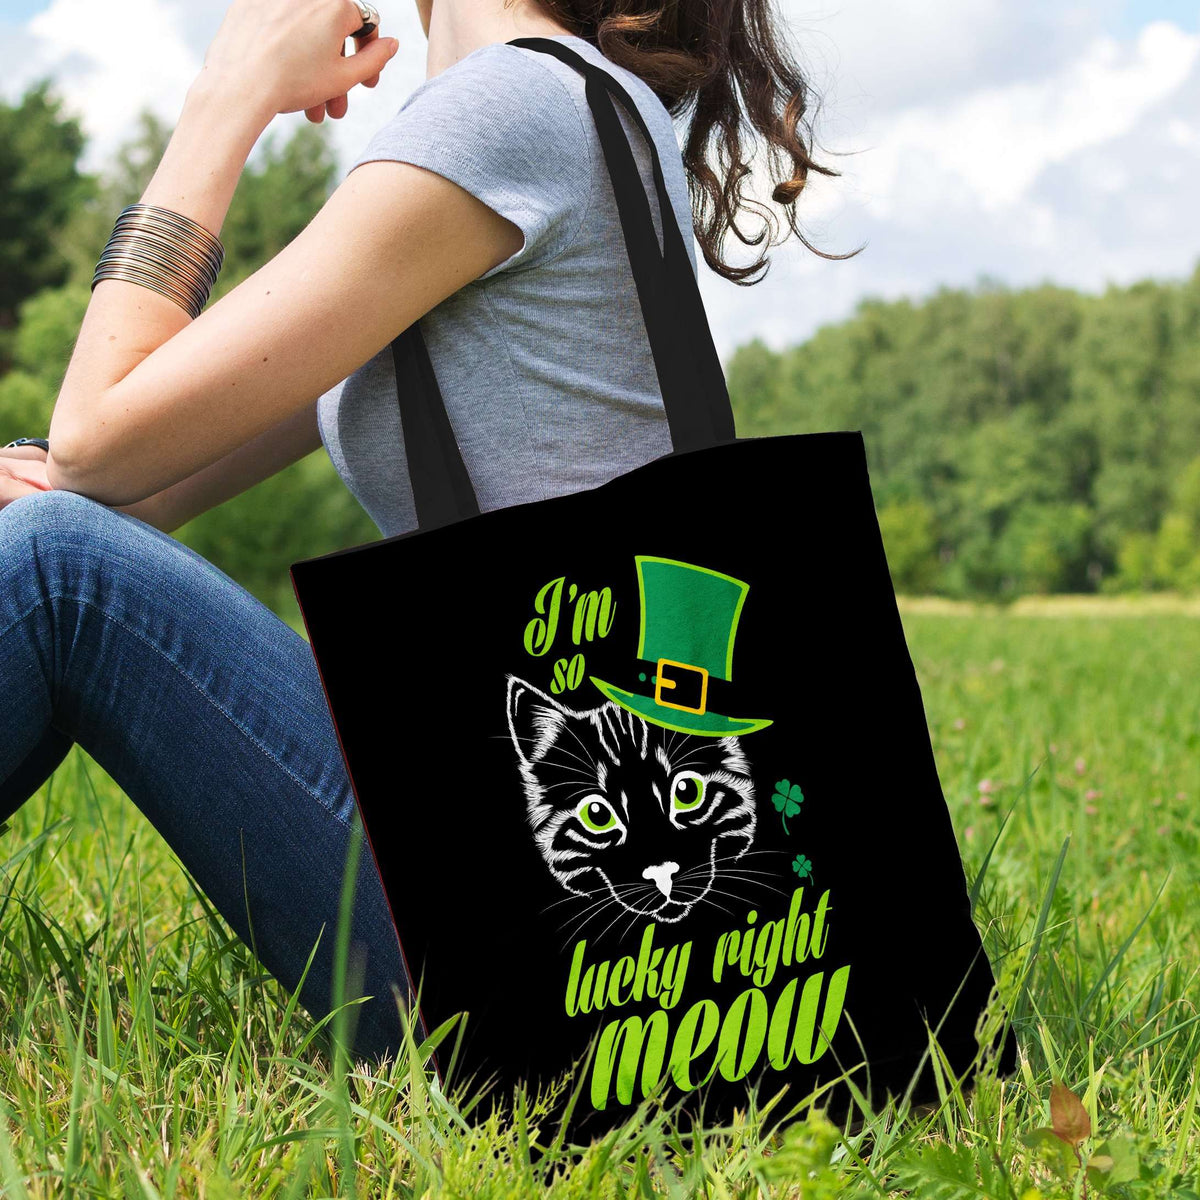 Designs by MyUtopia Shout Out:I'm So Lucky Right Meow Fabric Totebag Reusable Shopping Tote